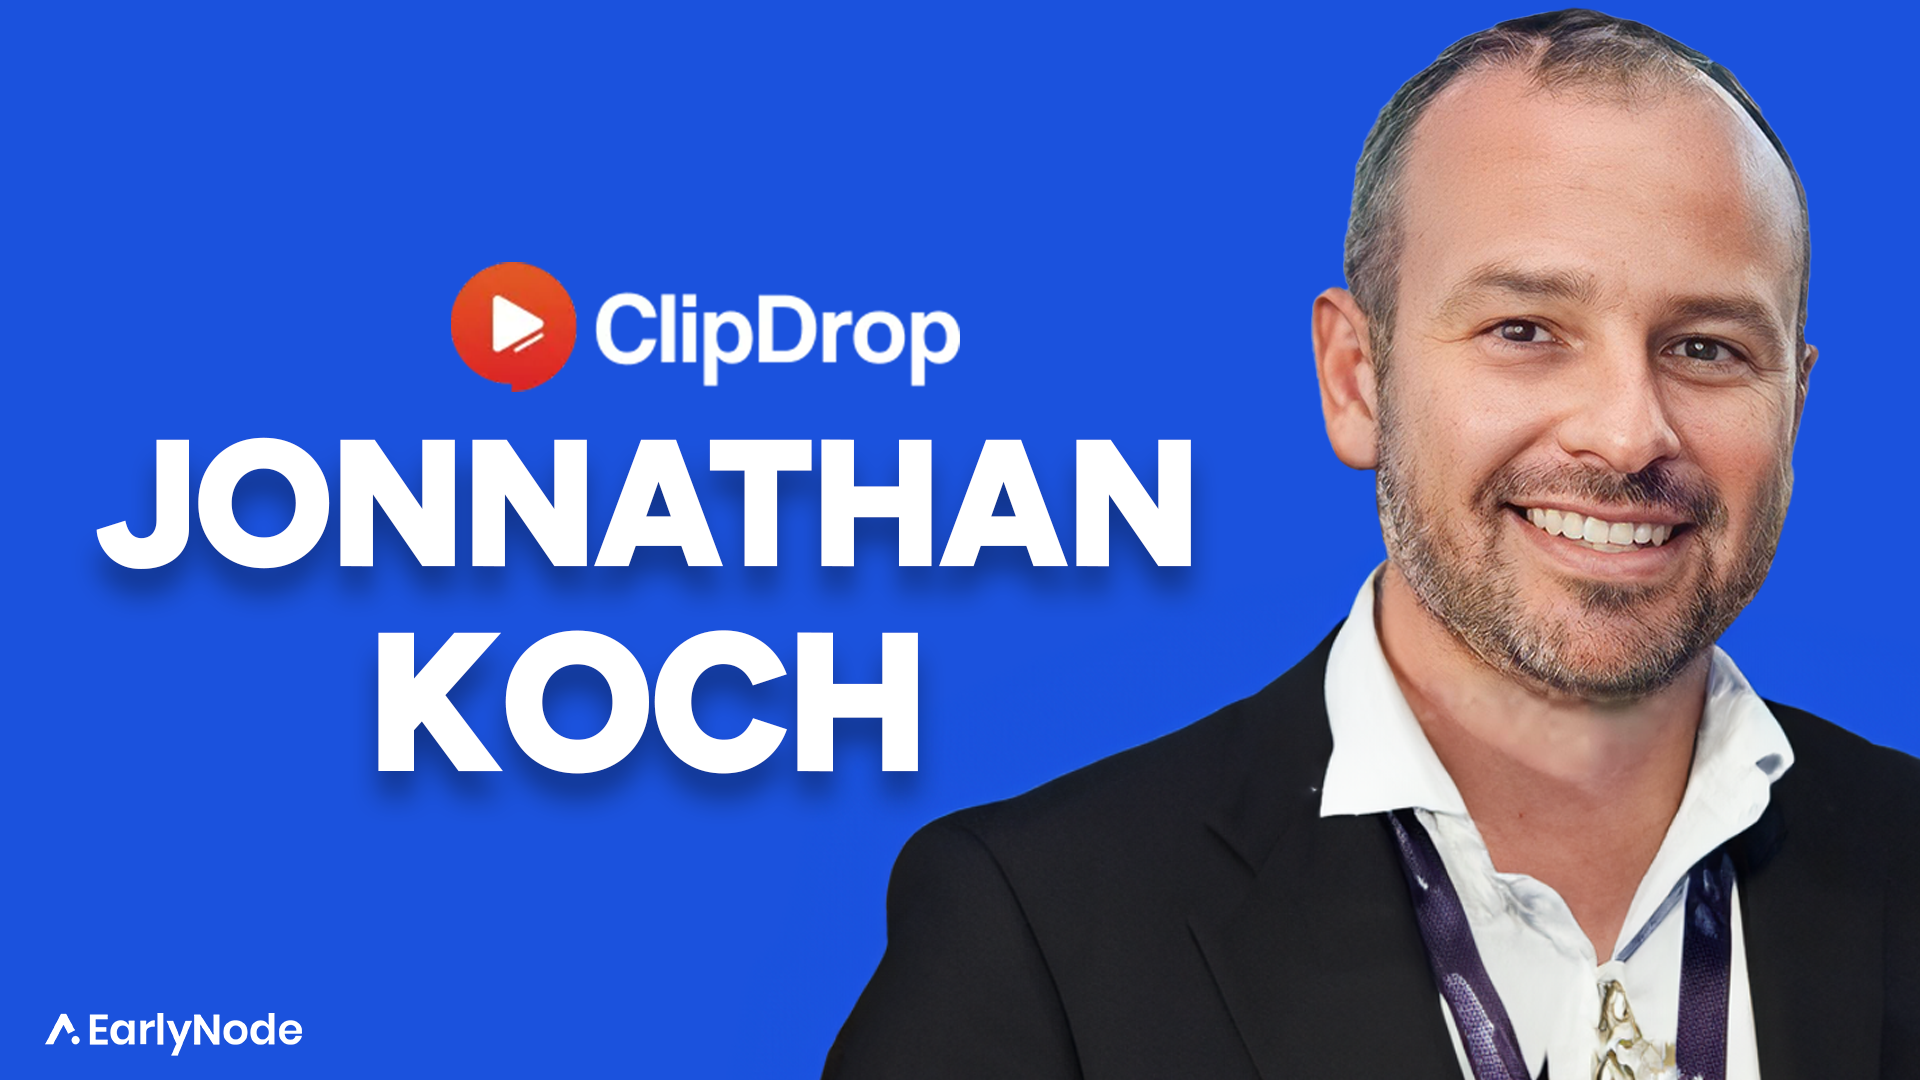 How to hire the best talent by NOT using AI with Jonnathan Koch (Founder of ClipDrop, TalentGenie)